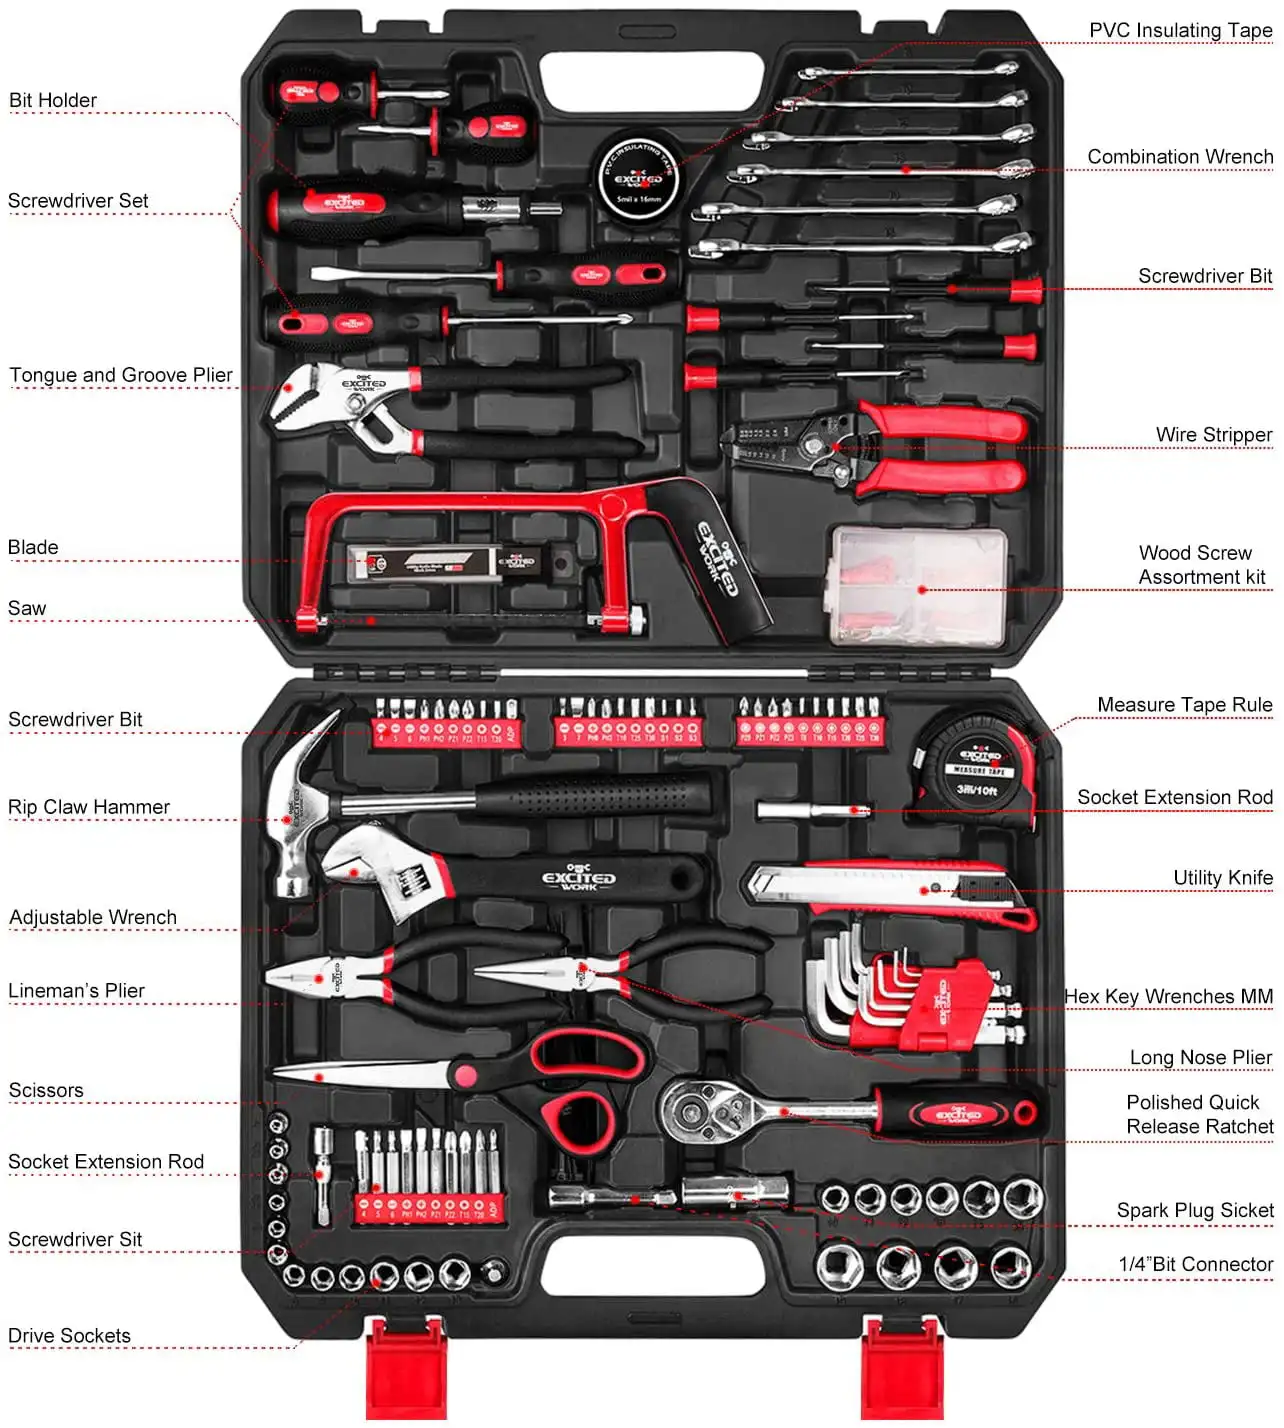 

198-Piece Household Tool Set, General Home/Auto Repair Hand Tool Kit with Hammer, Pliers, Wrenches, Sockets and Toolbox Storage